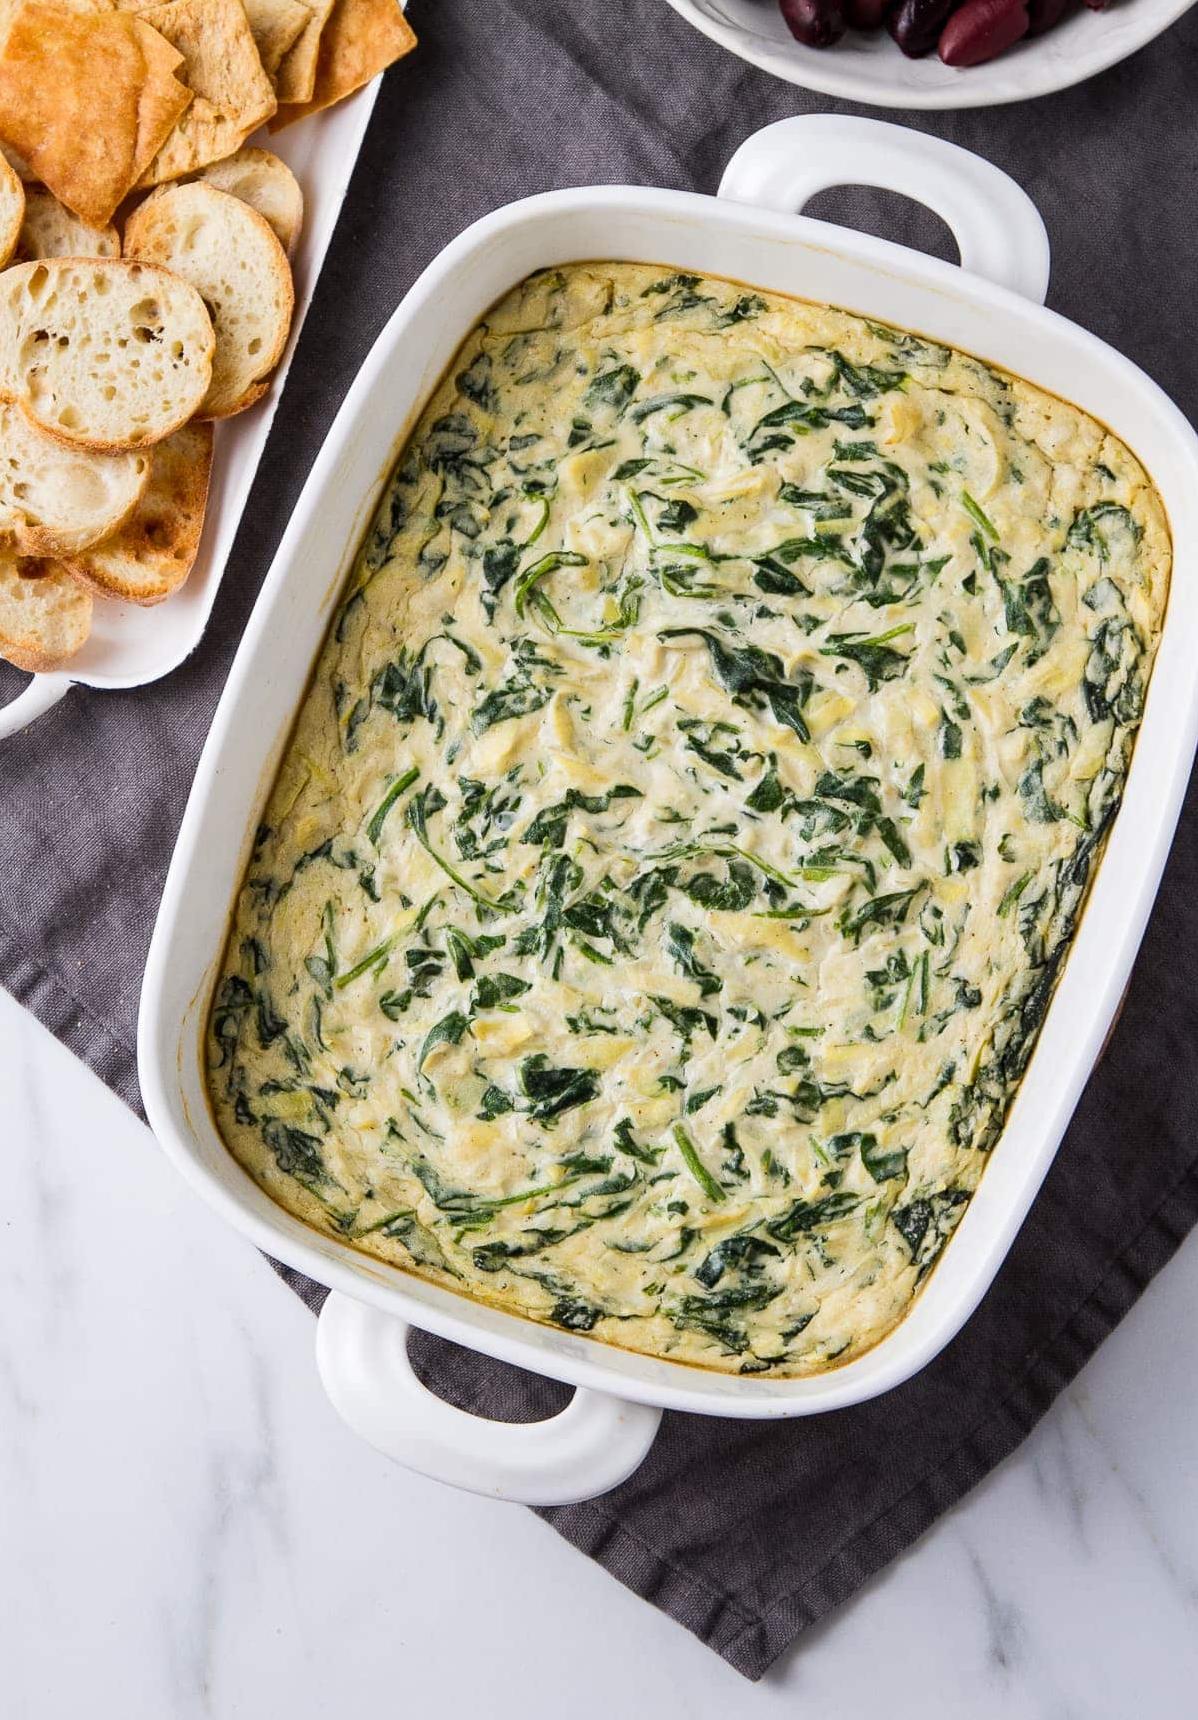  Get ready to fall in love with this vegan spinach dip!